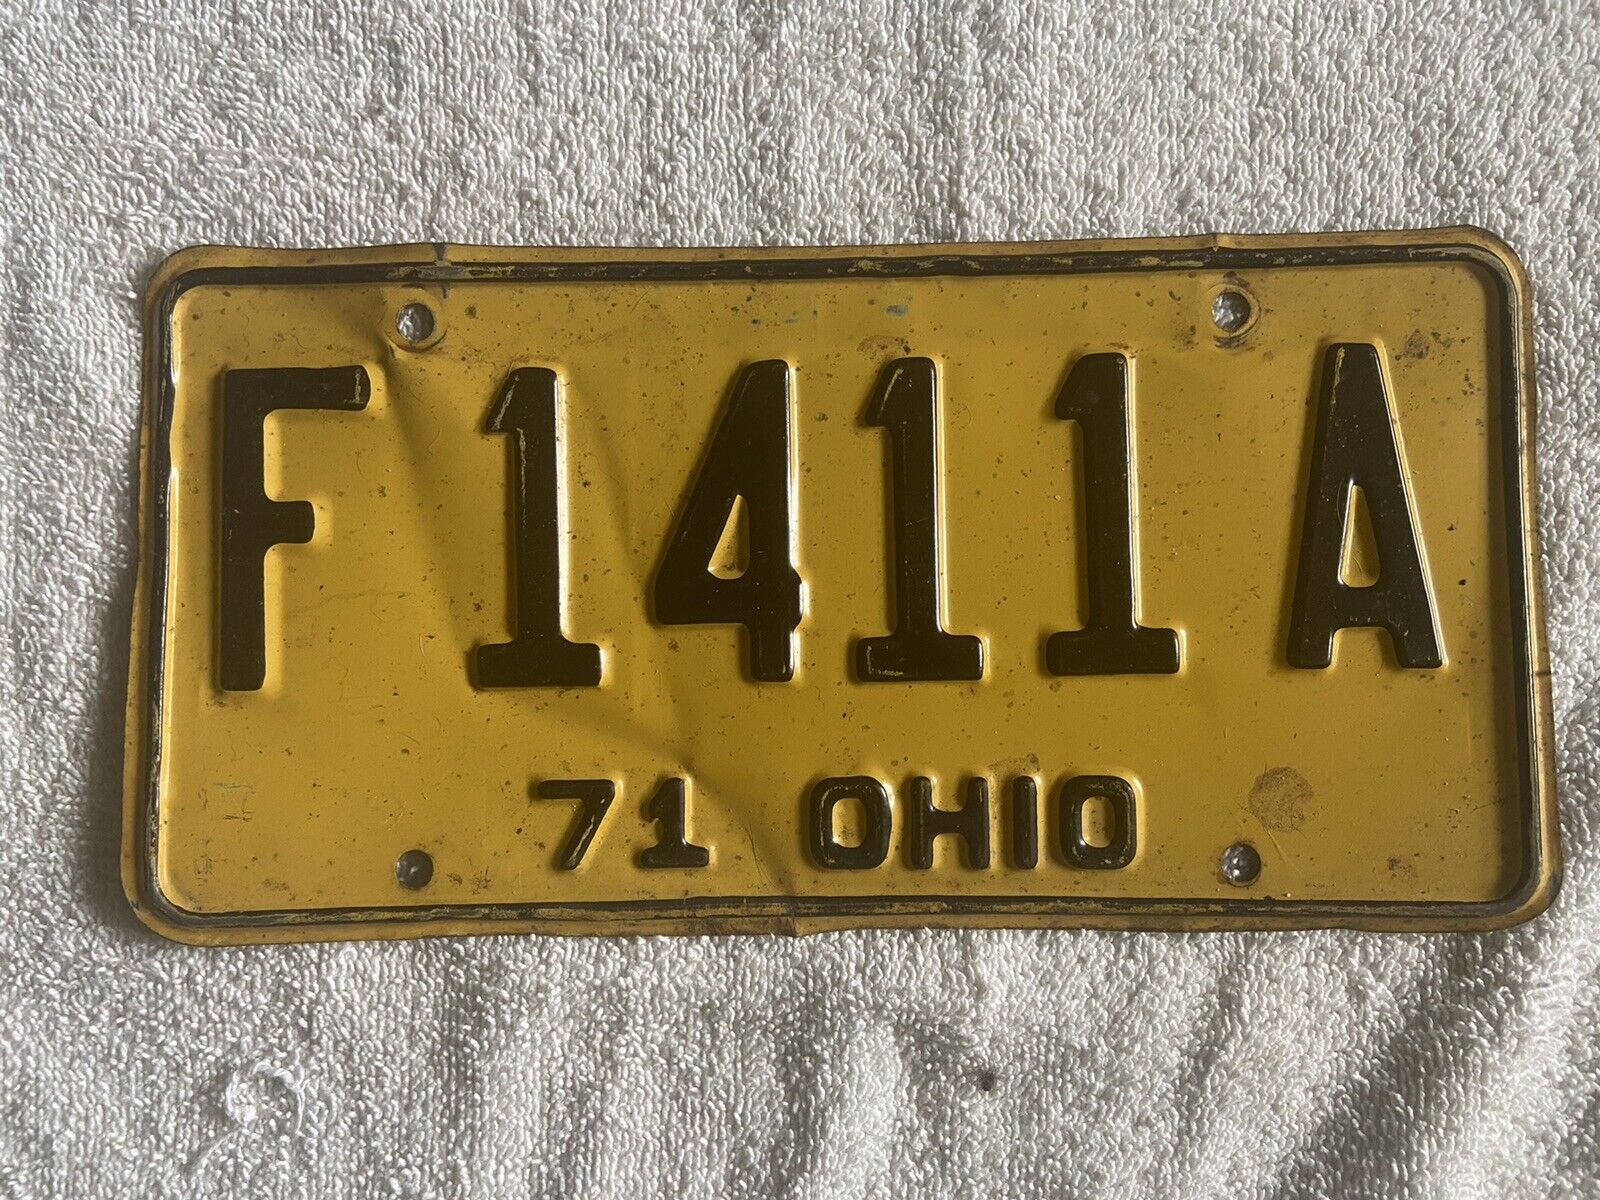 Bent VINTAGE 1971 OHIO LICENSE PLATE See My Other Plates